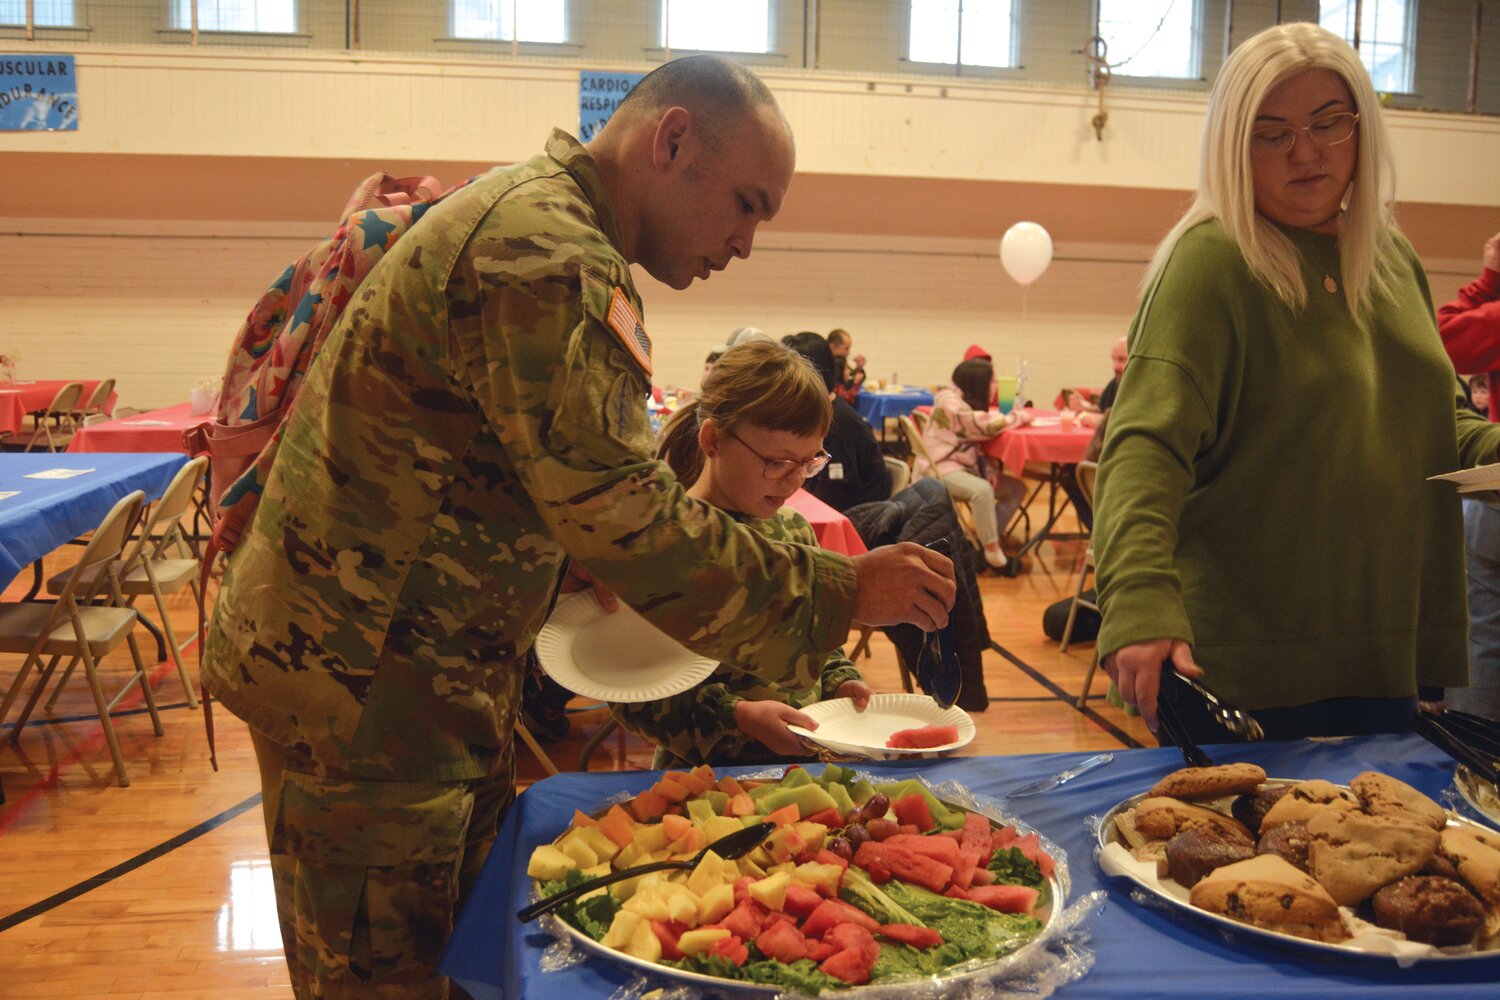 Sgt. First Class Ryan Lawless (left) helps himself to breakfast at Roy Elementary School on Nov. 9.